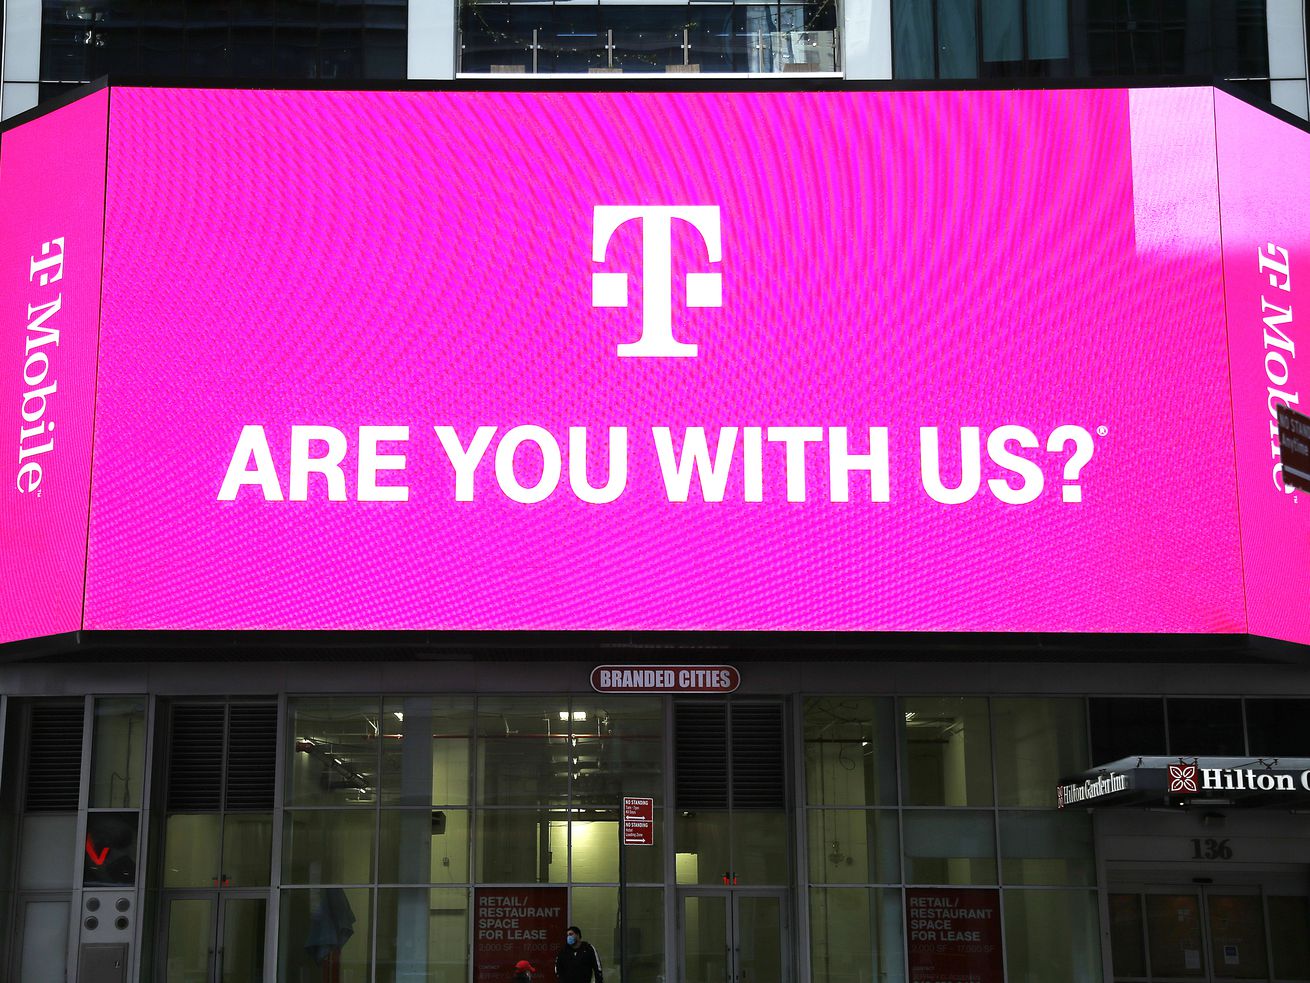 T-Mobile network advertisement seen on a Jumbotron in Times Square reads, “T-Mobile. Are you with us?”